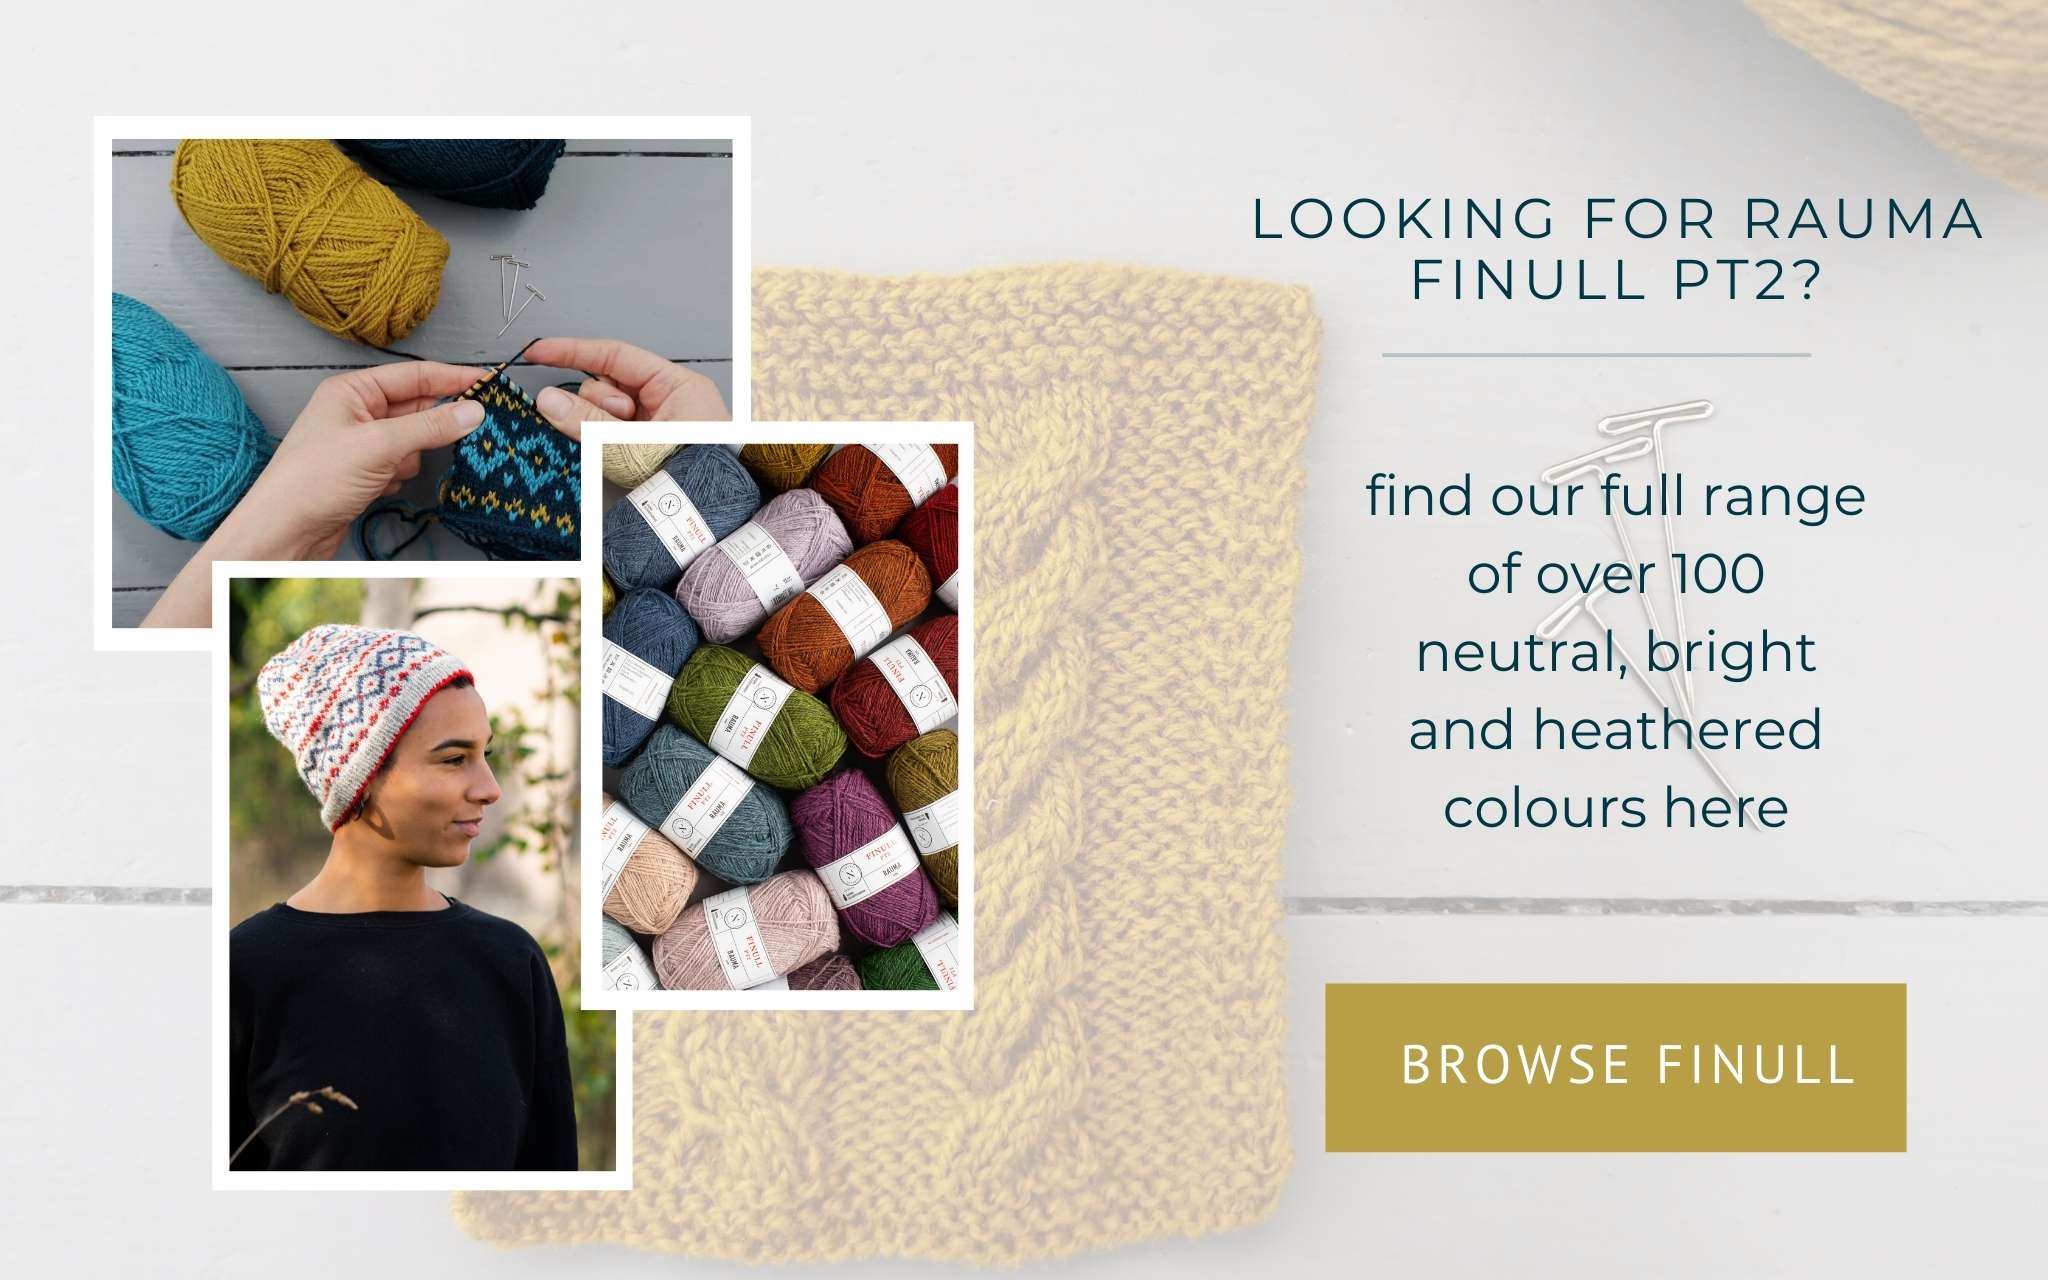 image of hands knitting a swatch, yarn tightly piled together and a model wearing a colourwork hat